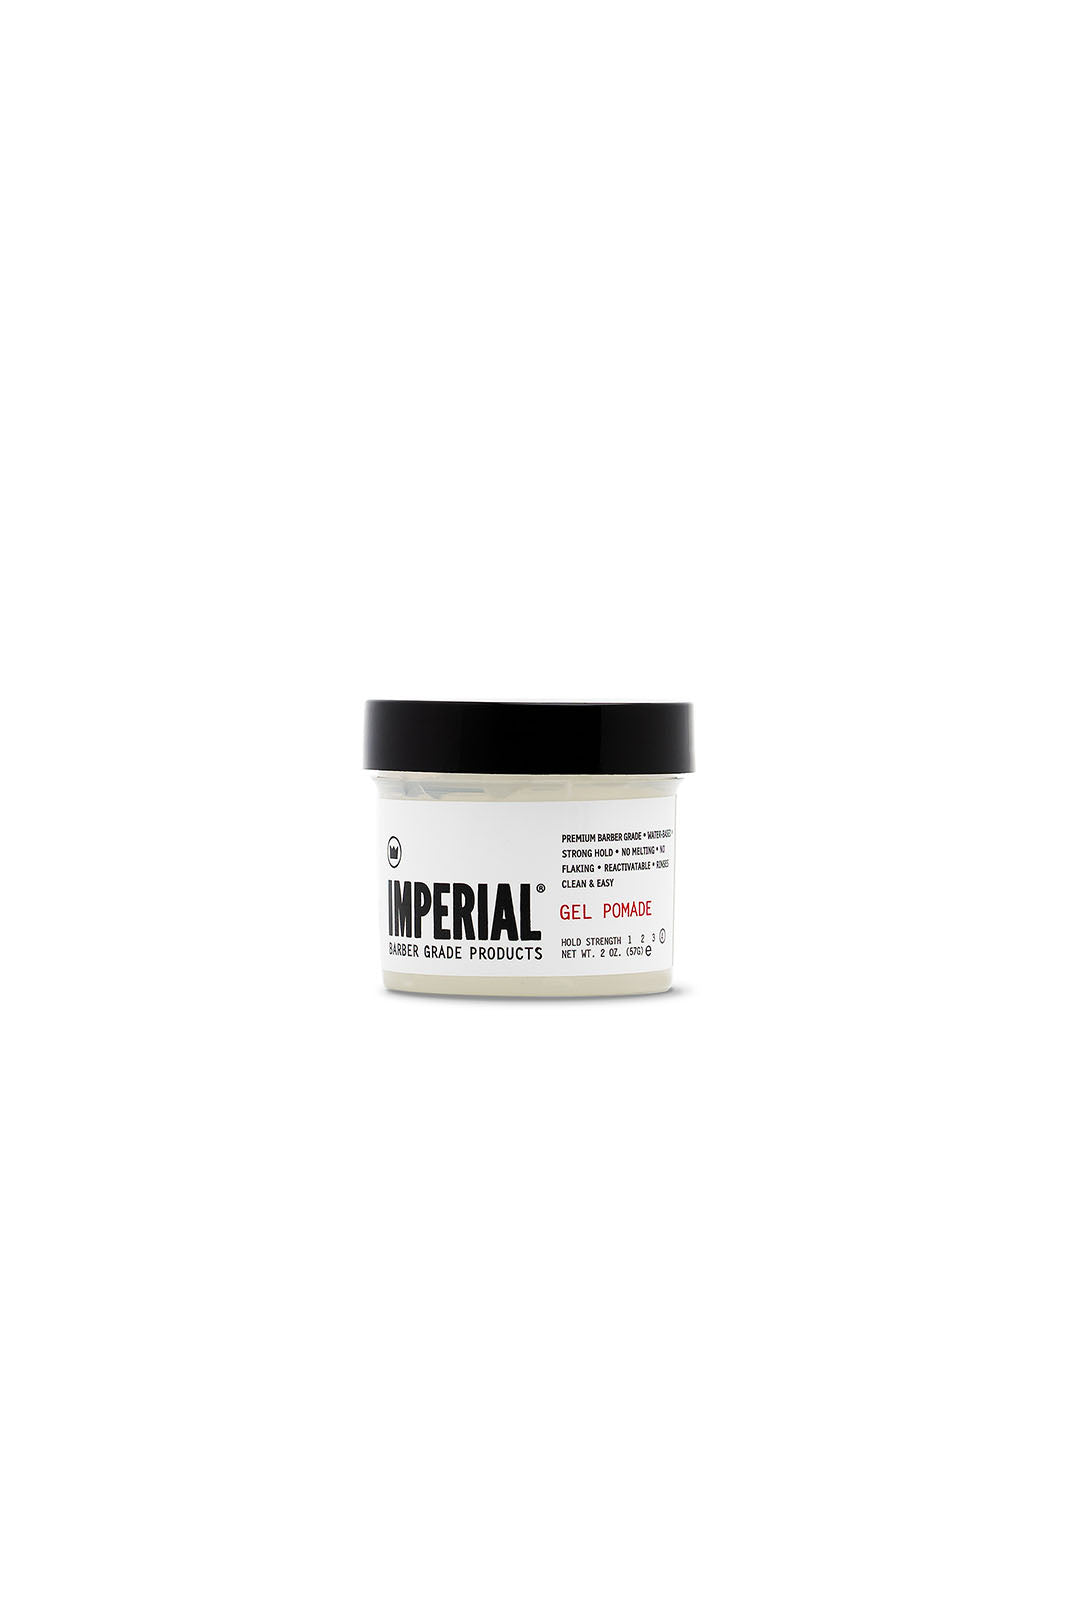 2 oz. container of Imperial Barber Grade Products Gel Pomade. Travel Size. 